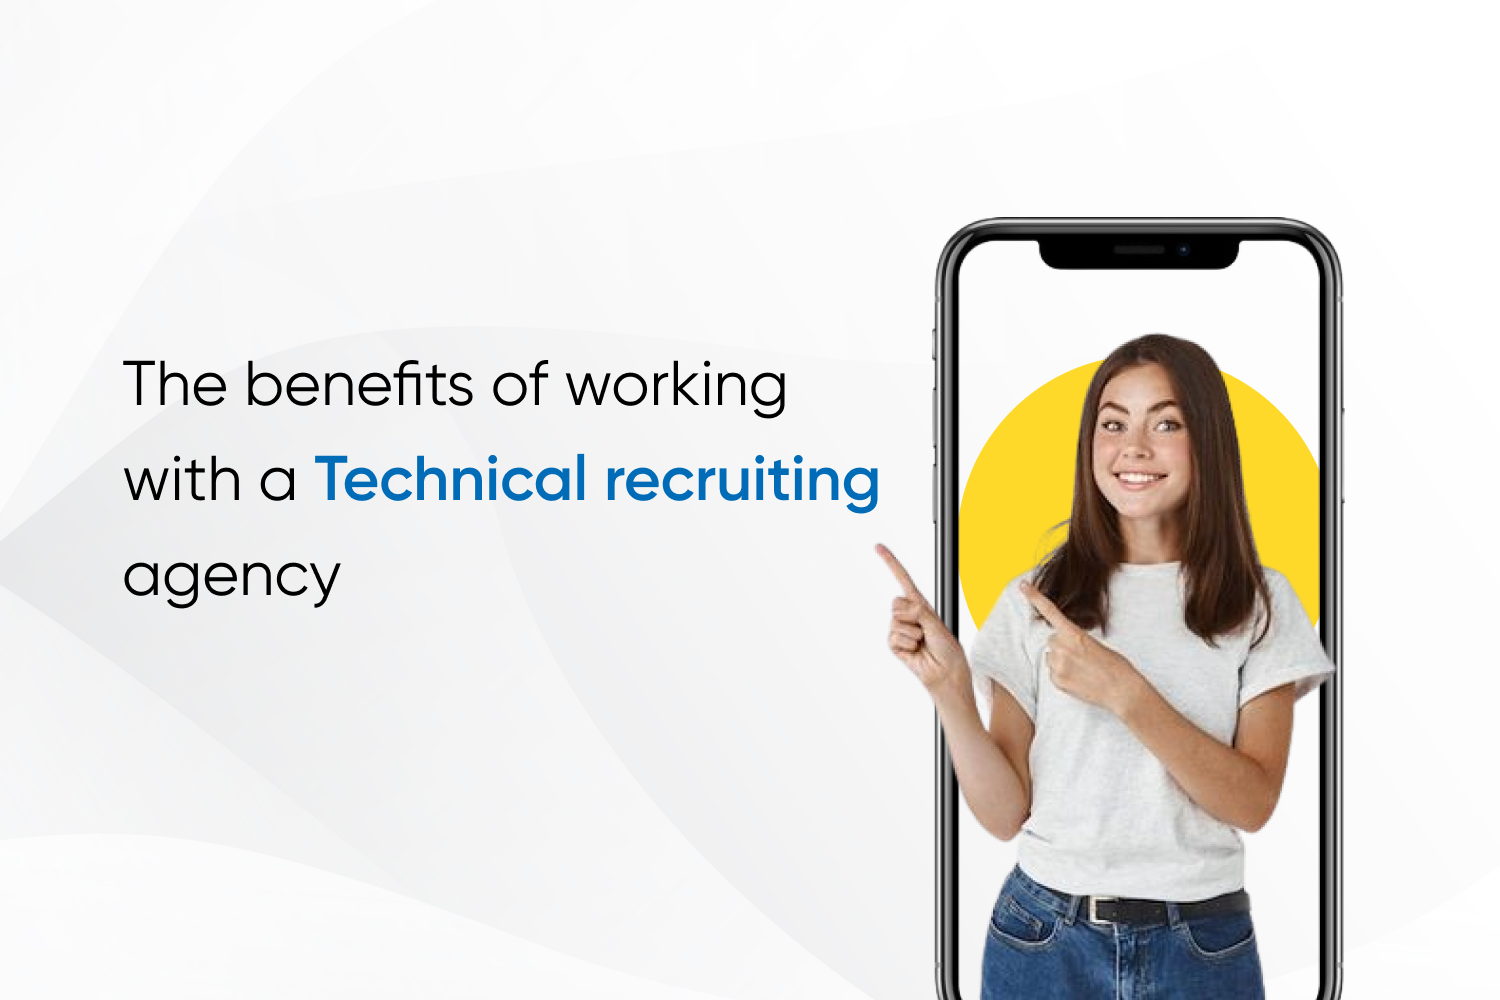 The benefits of working with a Technical recruiting agency